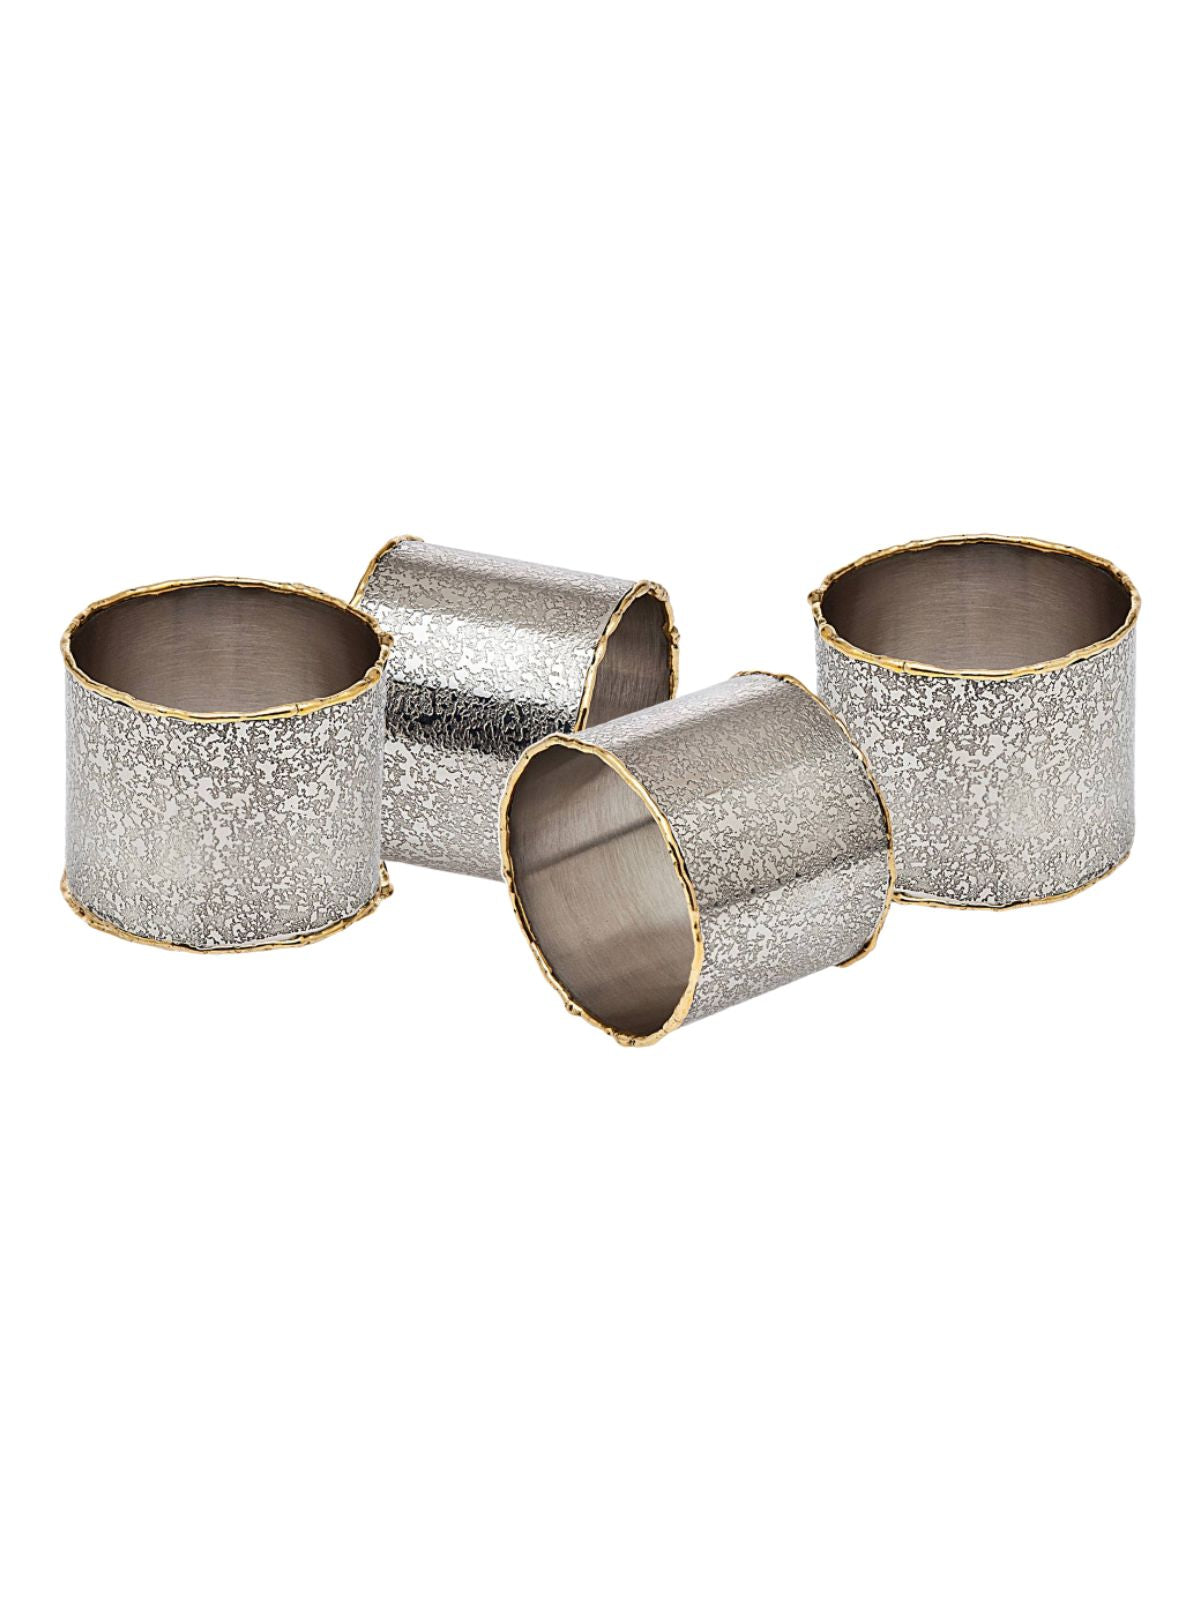 Set of 4 Golden Frost Luxury Napkin Rings sold by KYA Home Decor.